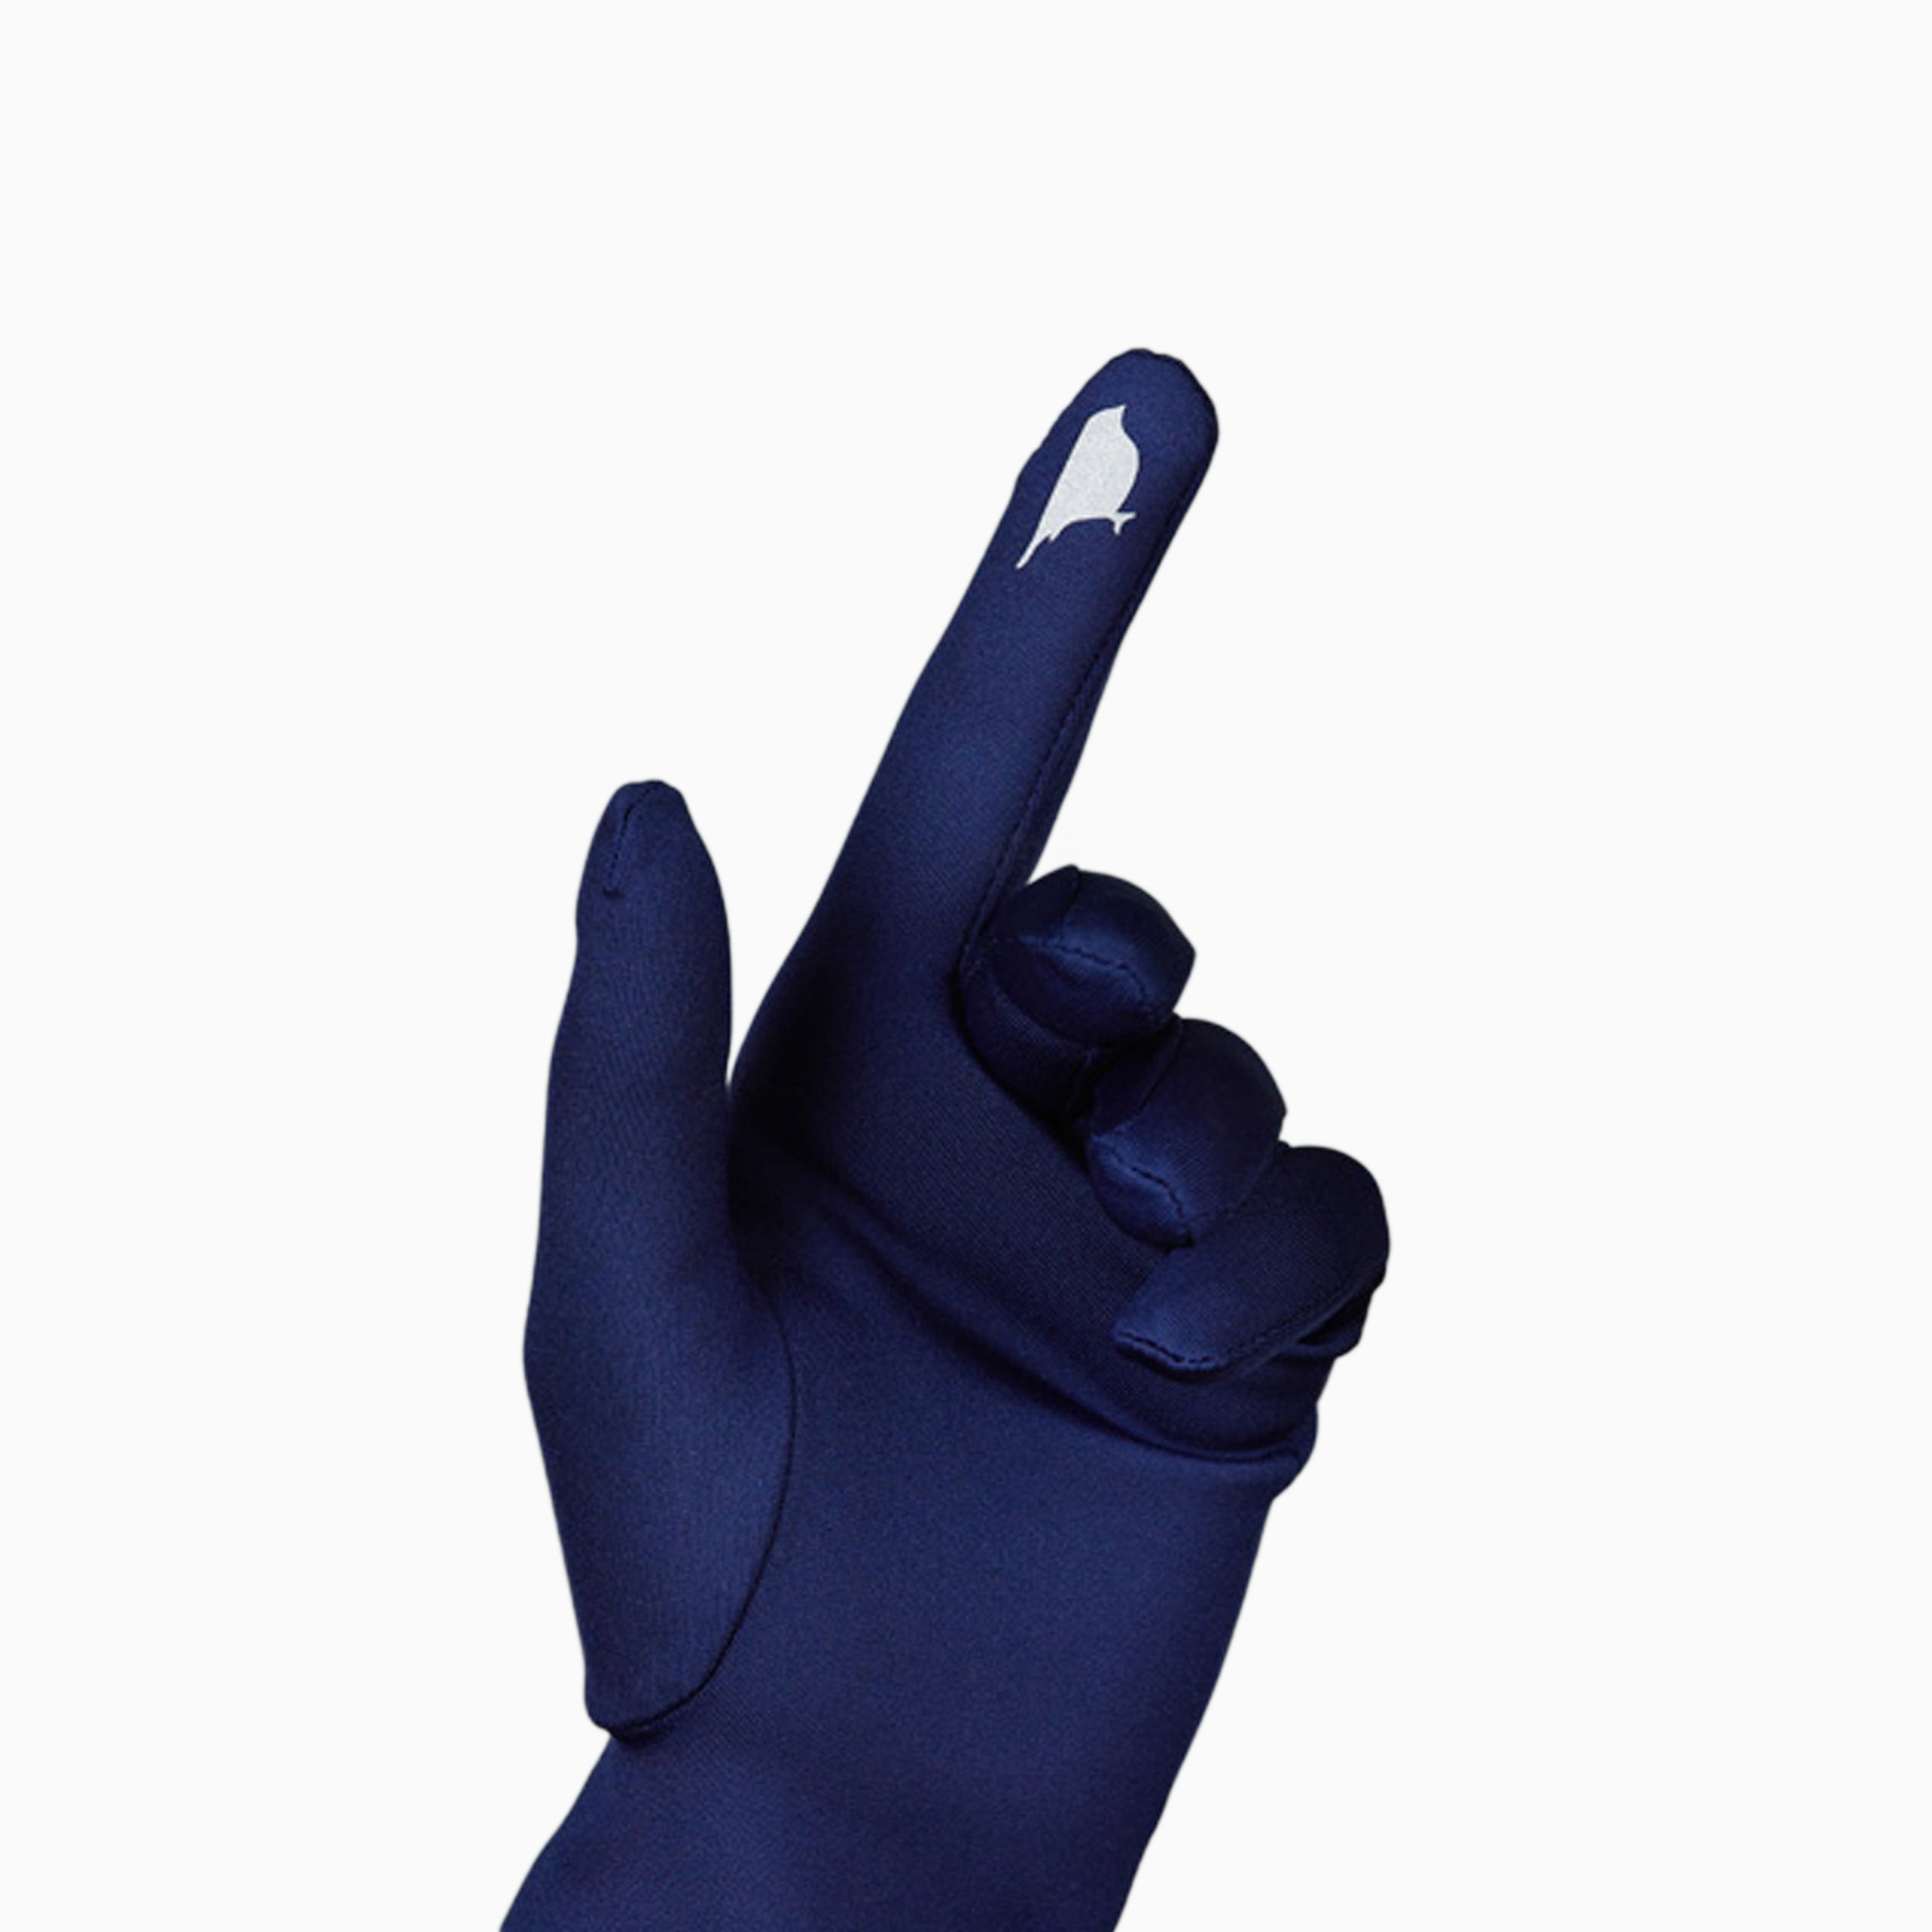 Blue women's glove against white background showing technology friendly index finger.